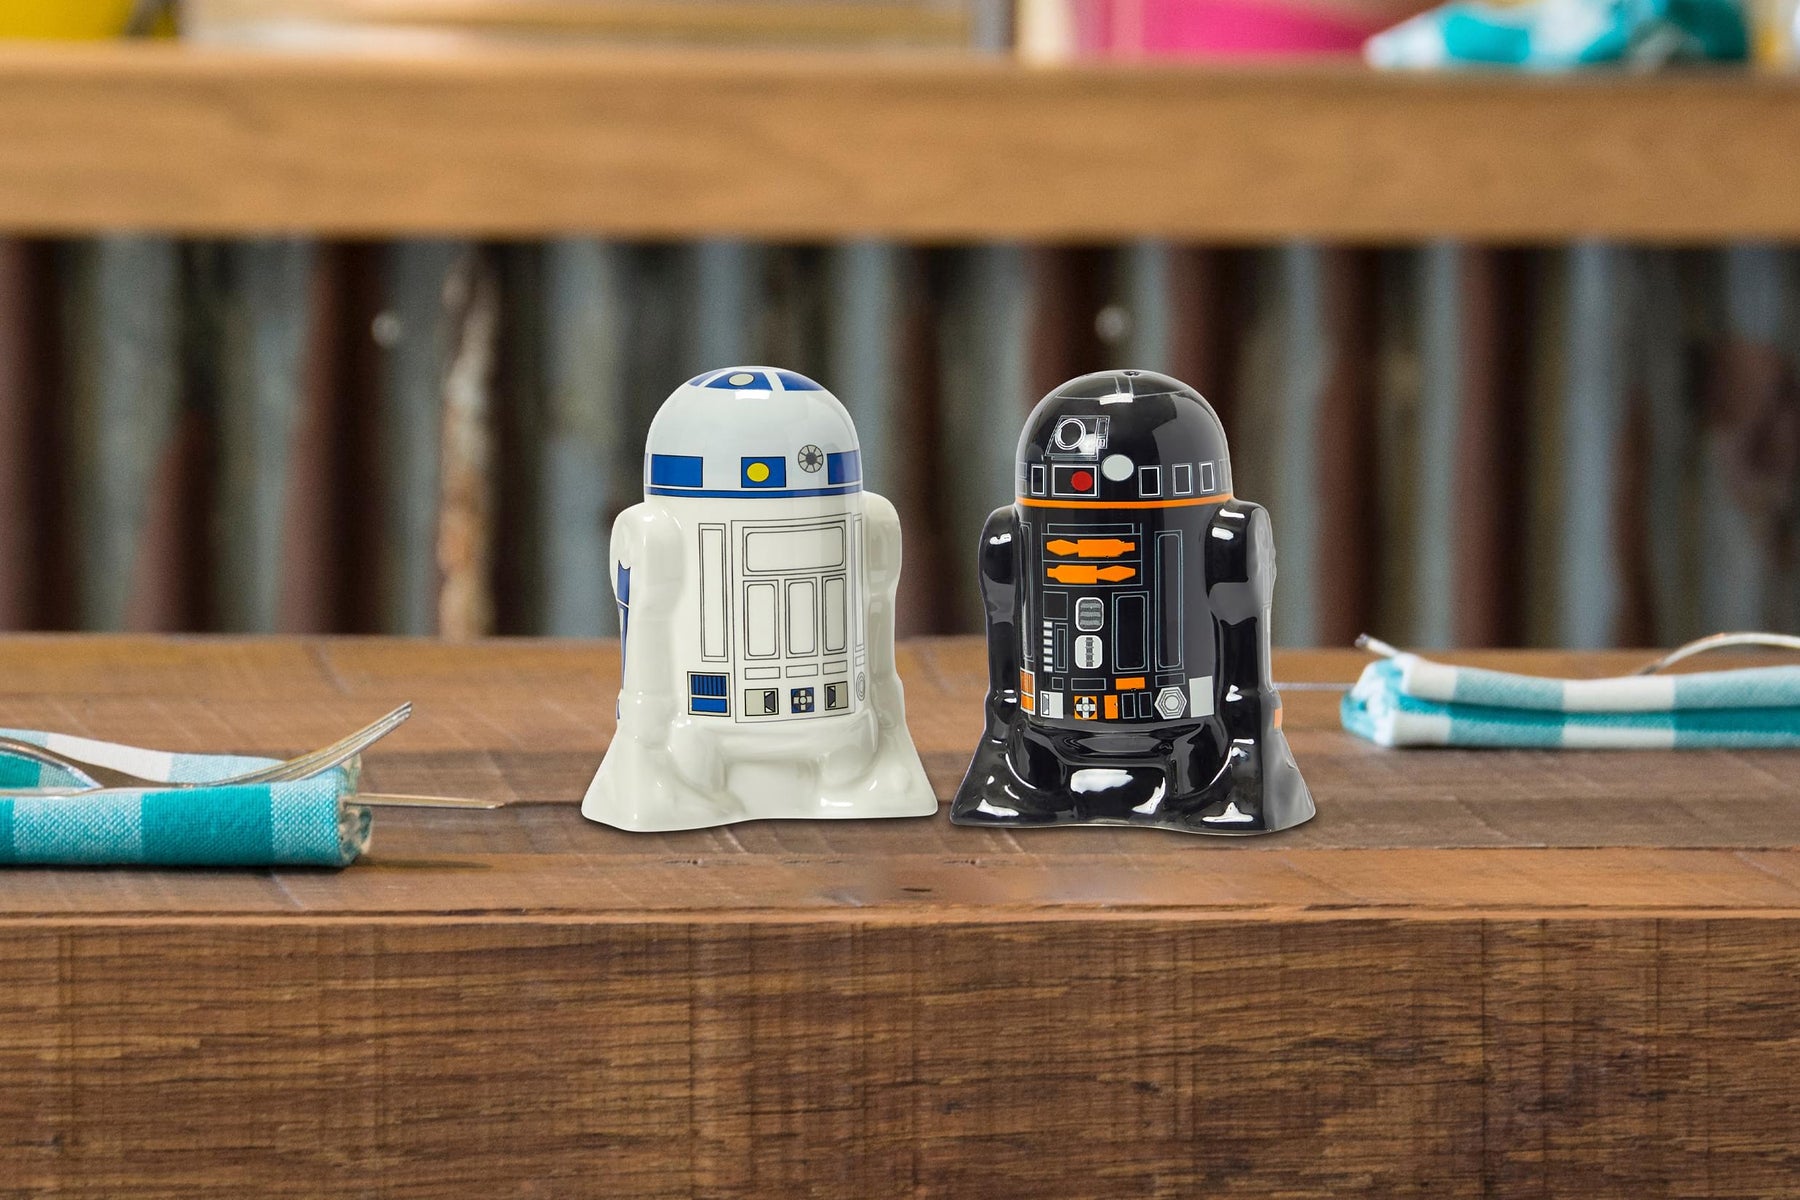 Disney Star Wars R2-D2 and R2-Q5 Ceramic Droid Salt and Pepper Shakers